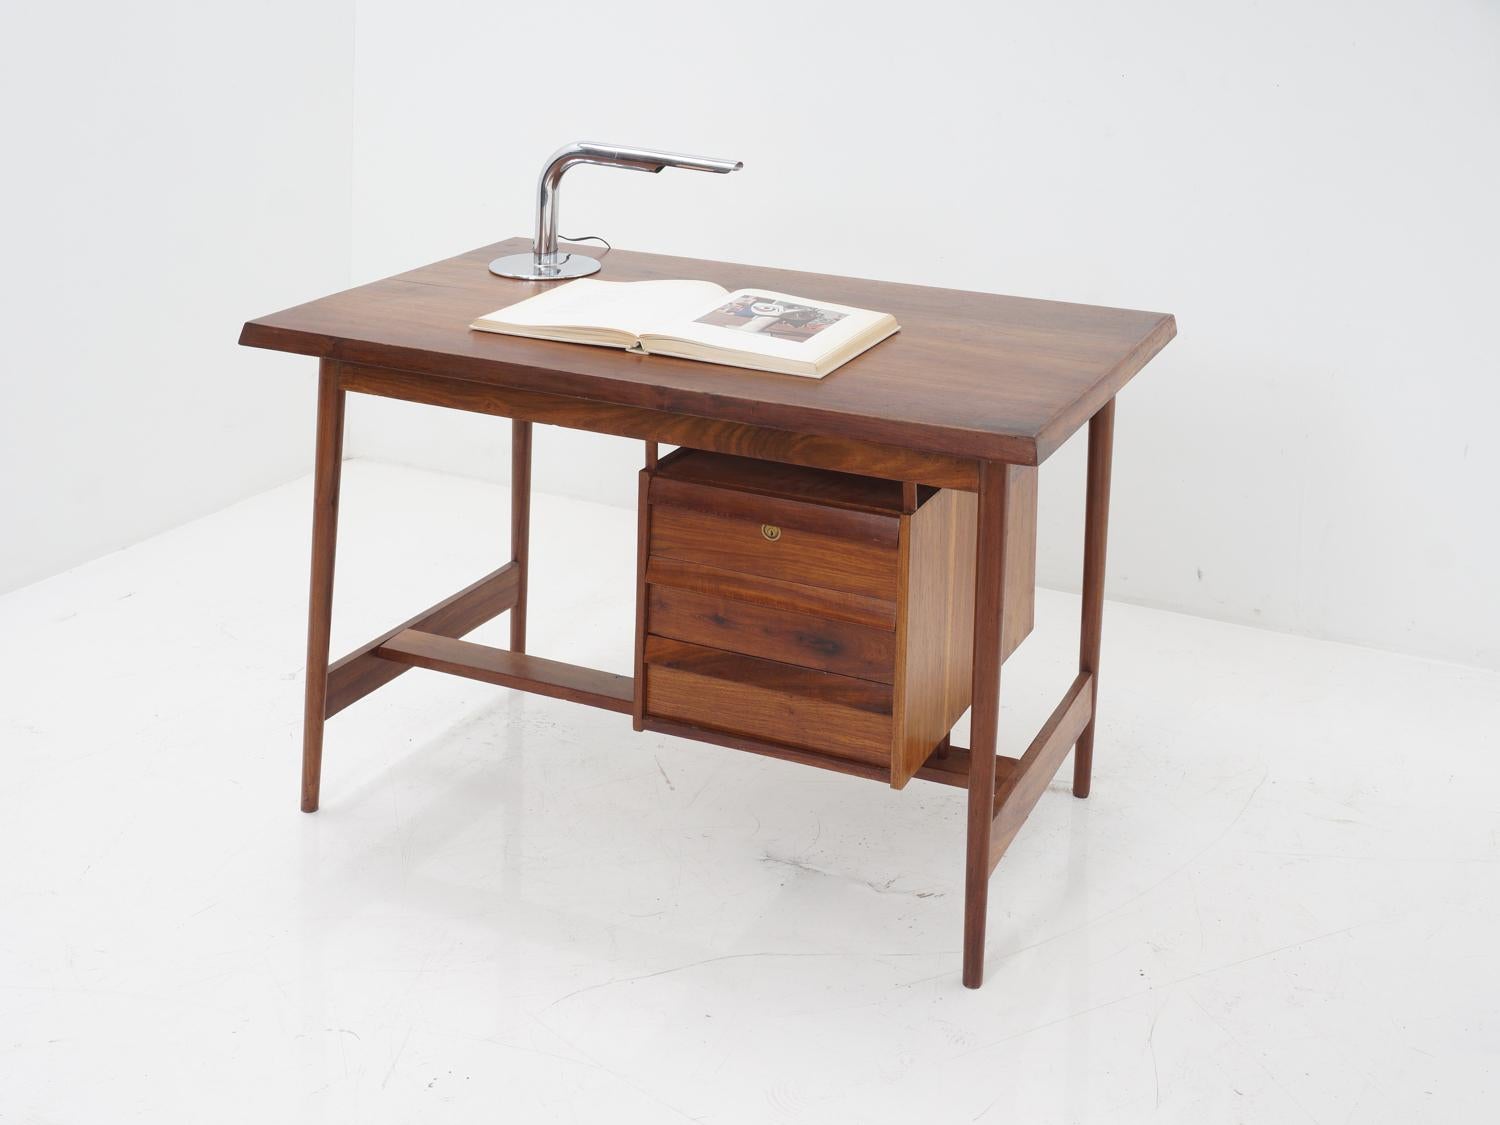 Are you tired of boring, uninspired desks? Look no further than this stunning 1950s rosewood desk. The craftsmanship and attention to detail are undeniable, from the smooth locking drawers to the beautiful wood grain. And let's not forget about the